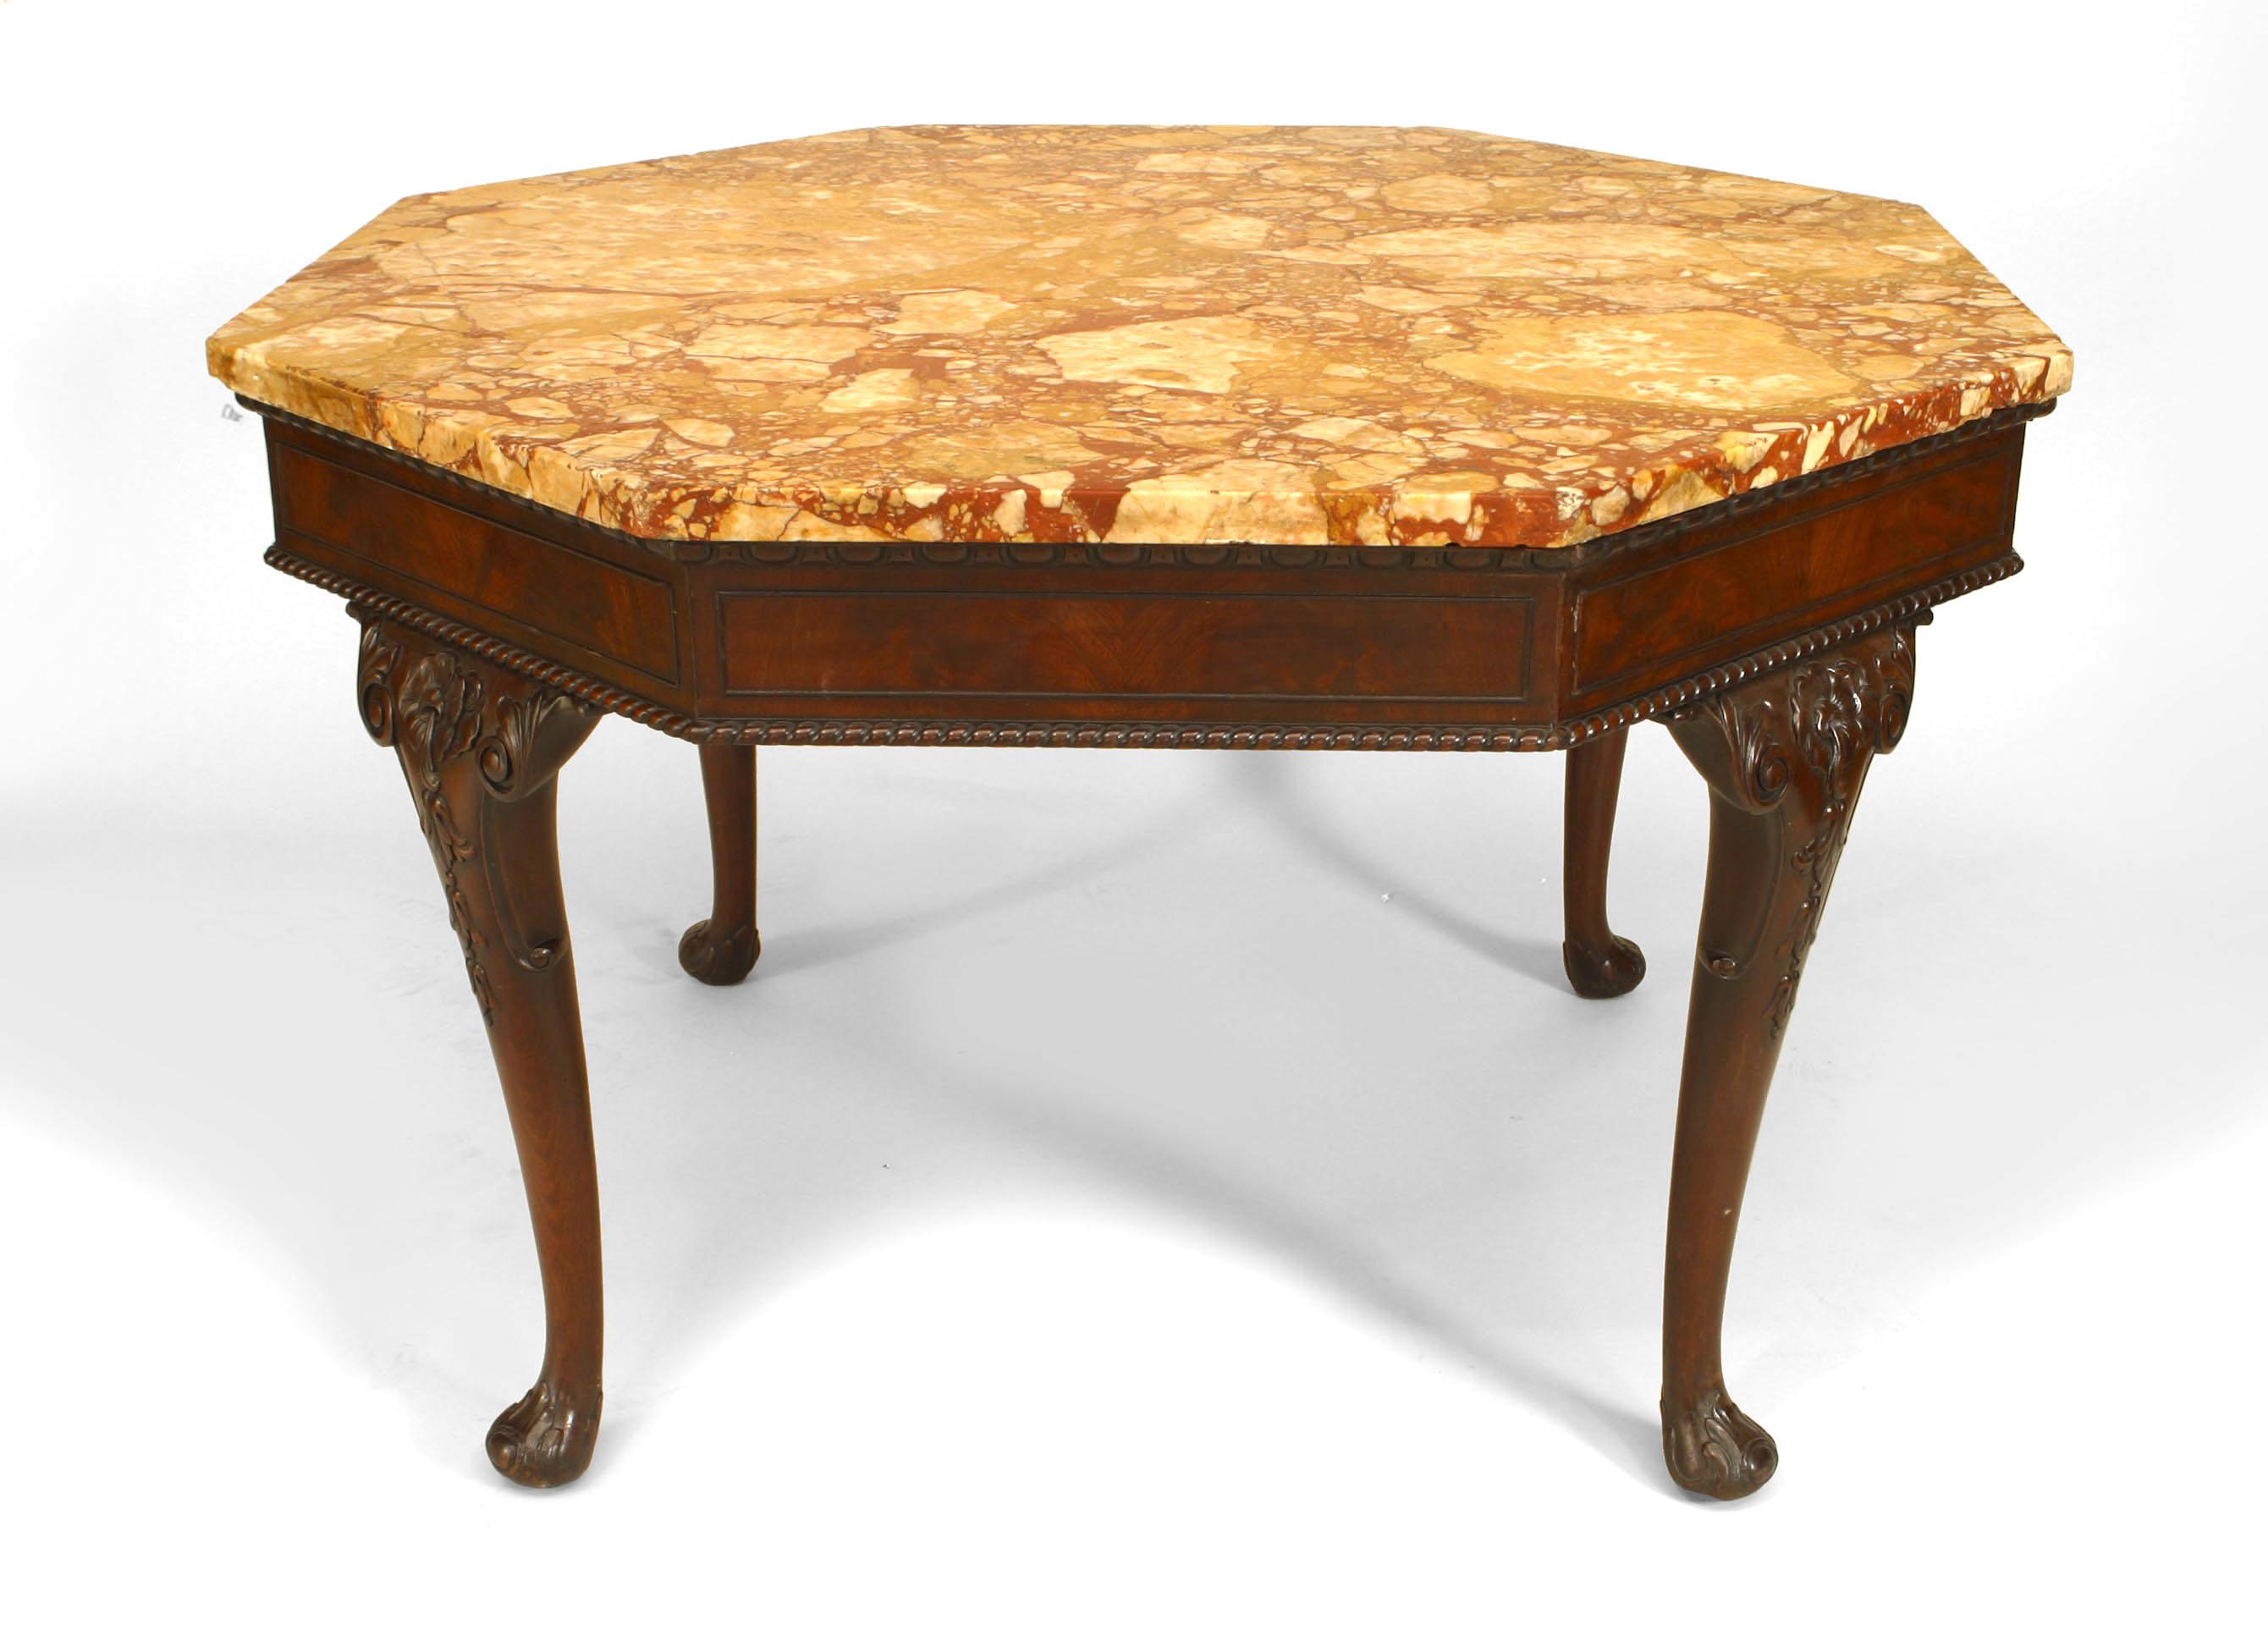 English Chippendale/Georgian (19th Century) mahogany center table with carved cabriole legs supporting an octagonal rouge marble top.
